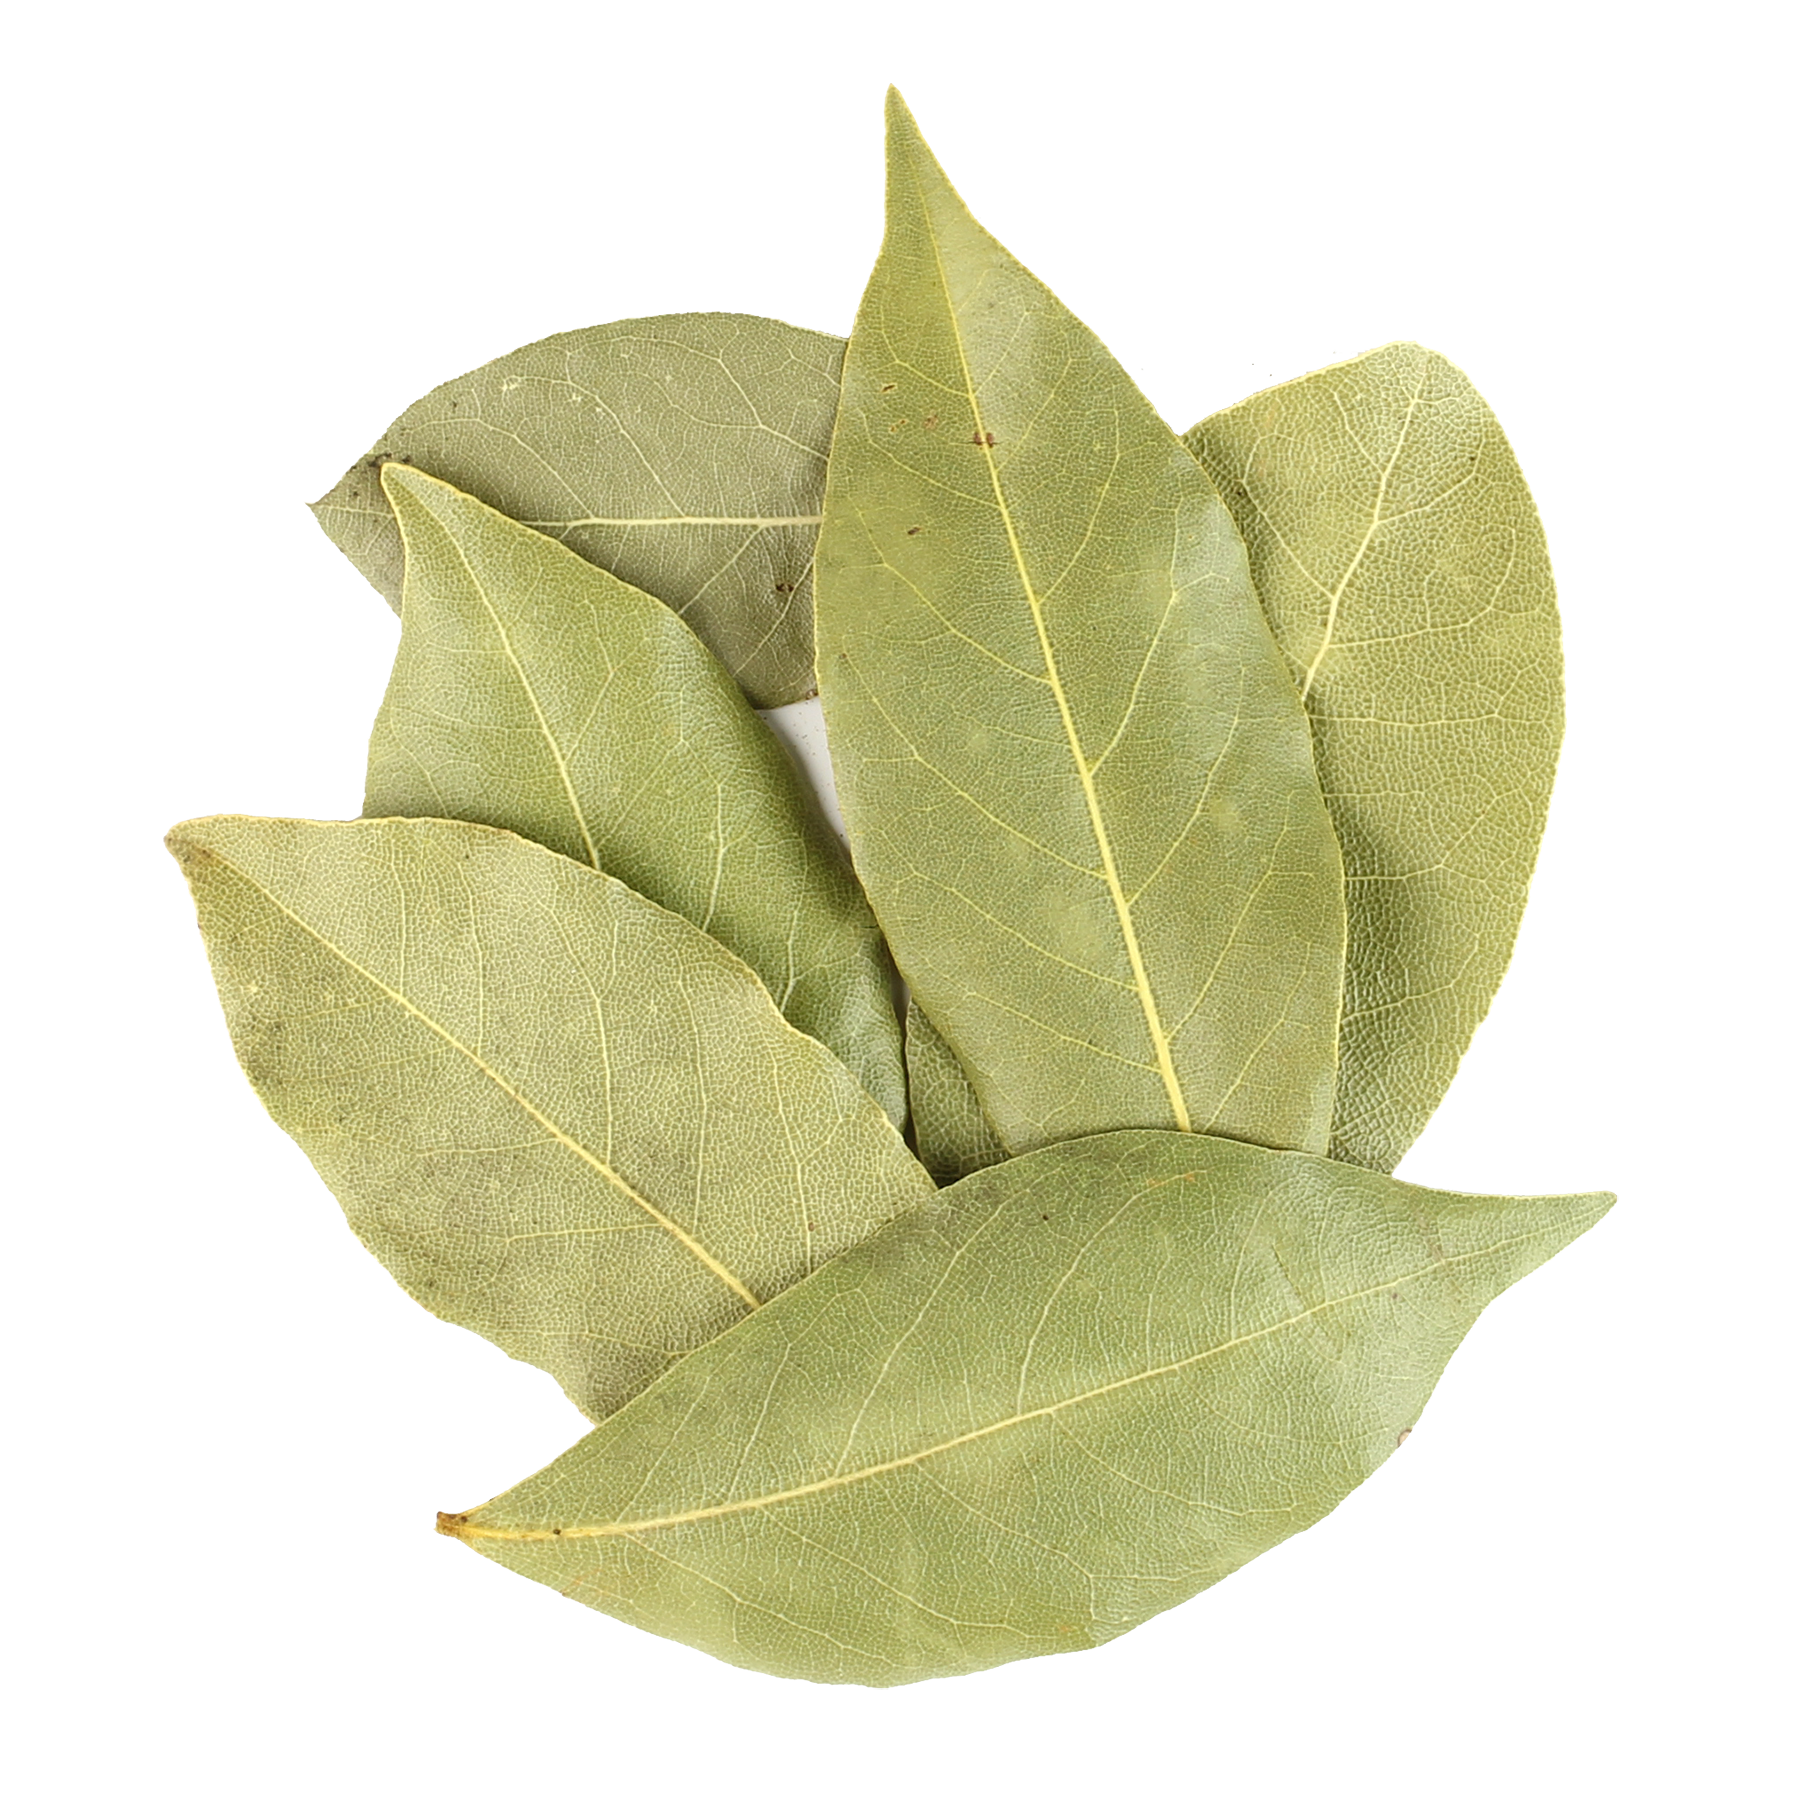 Frontier Co-Op Hand-Select Bay Leaf, Whole, Certified Organic, Bulk 16 oz. - image 1 of 8